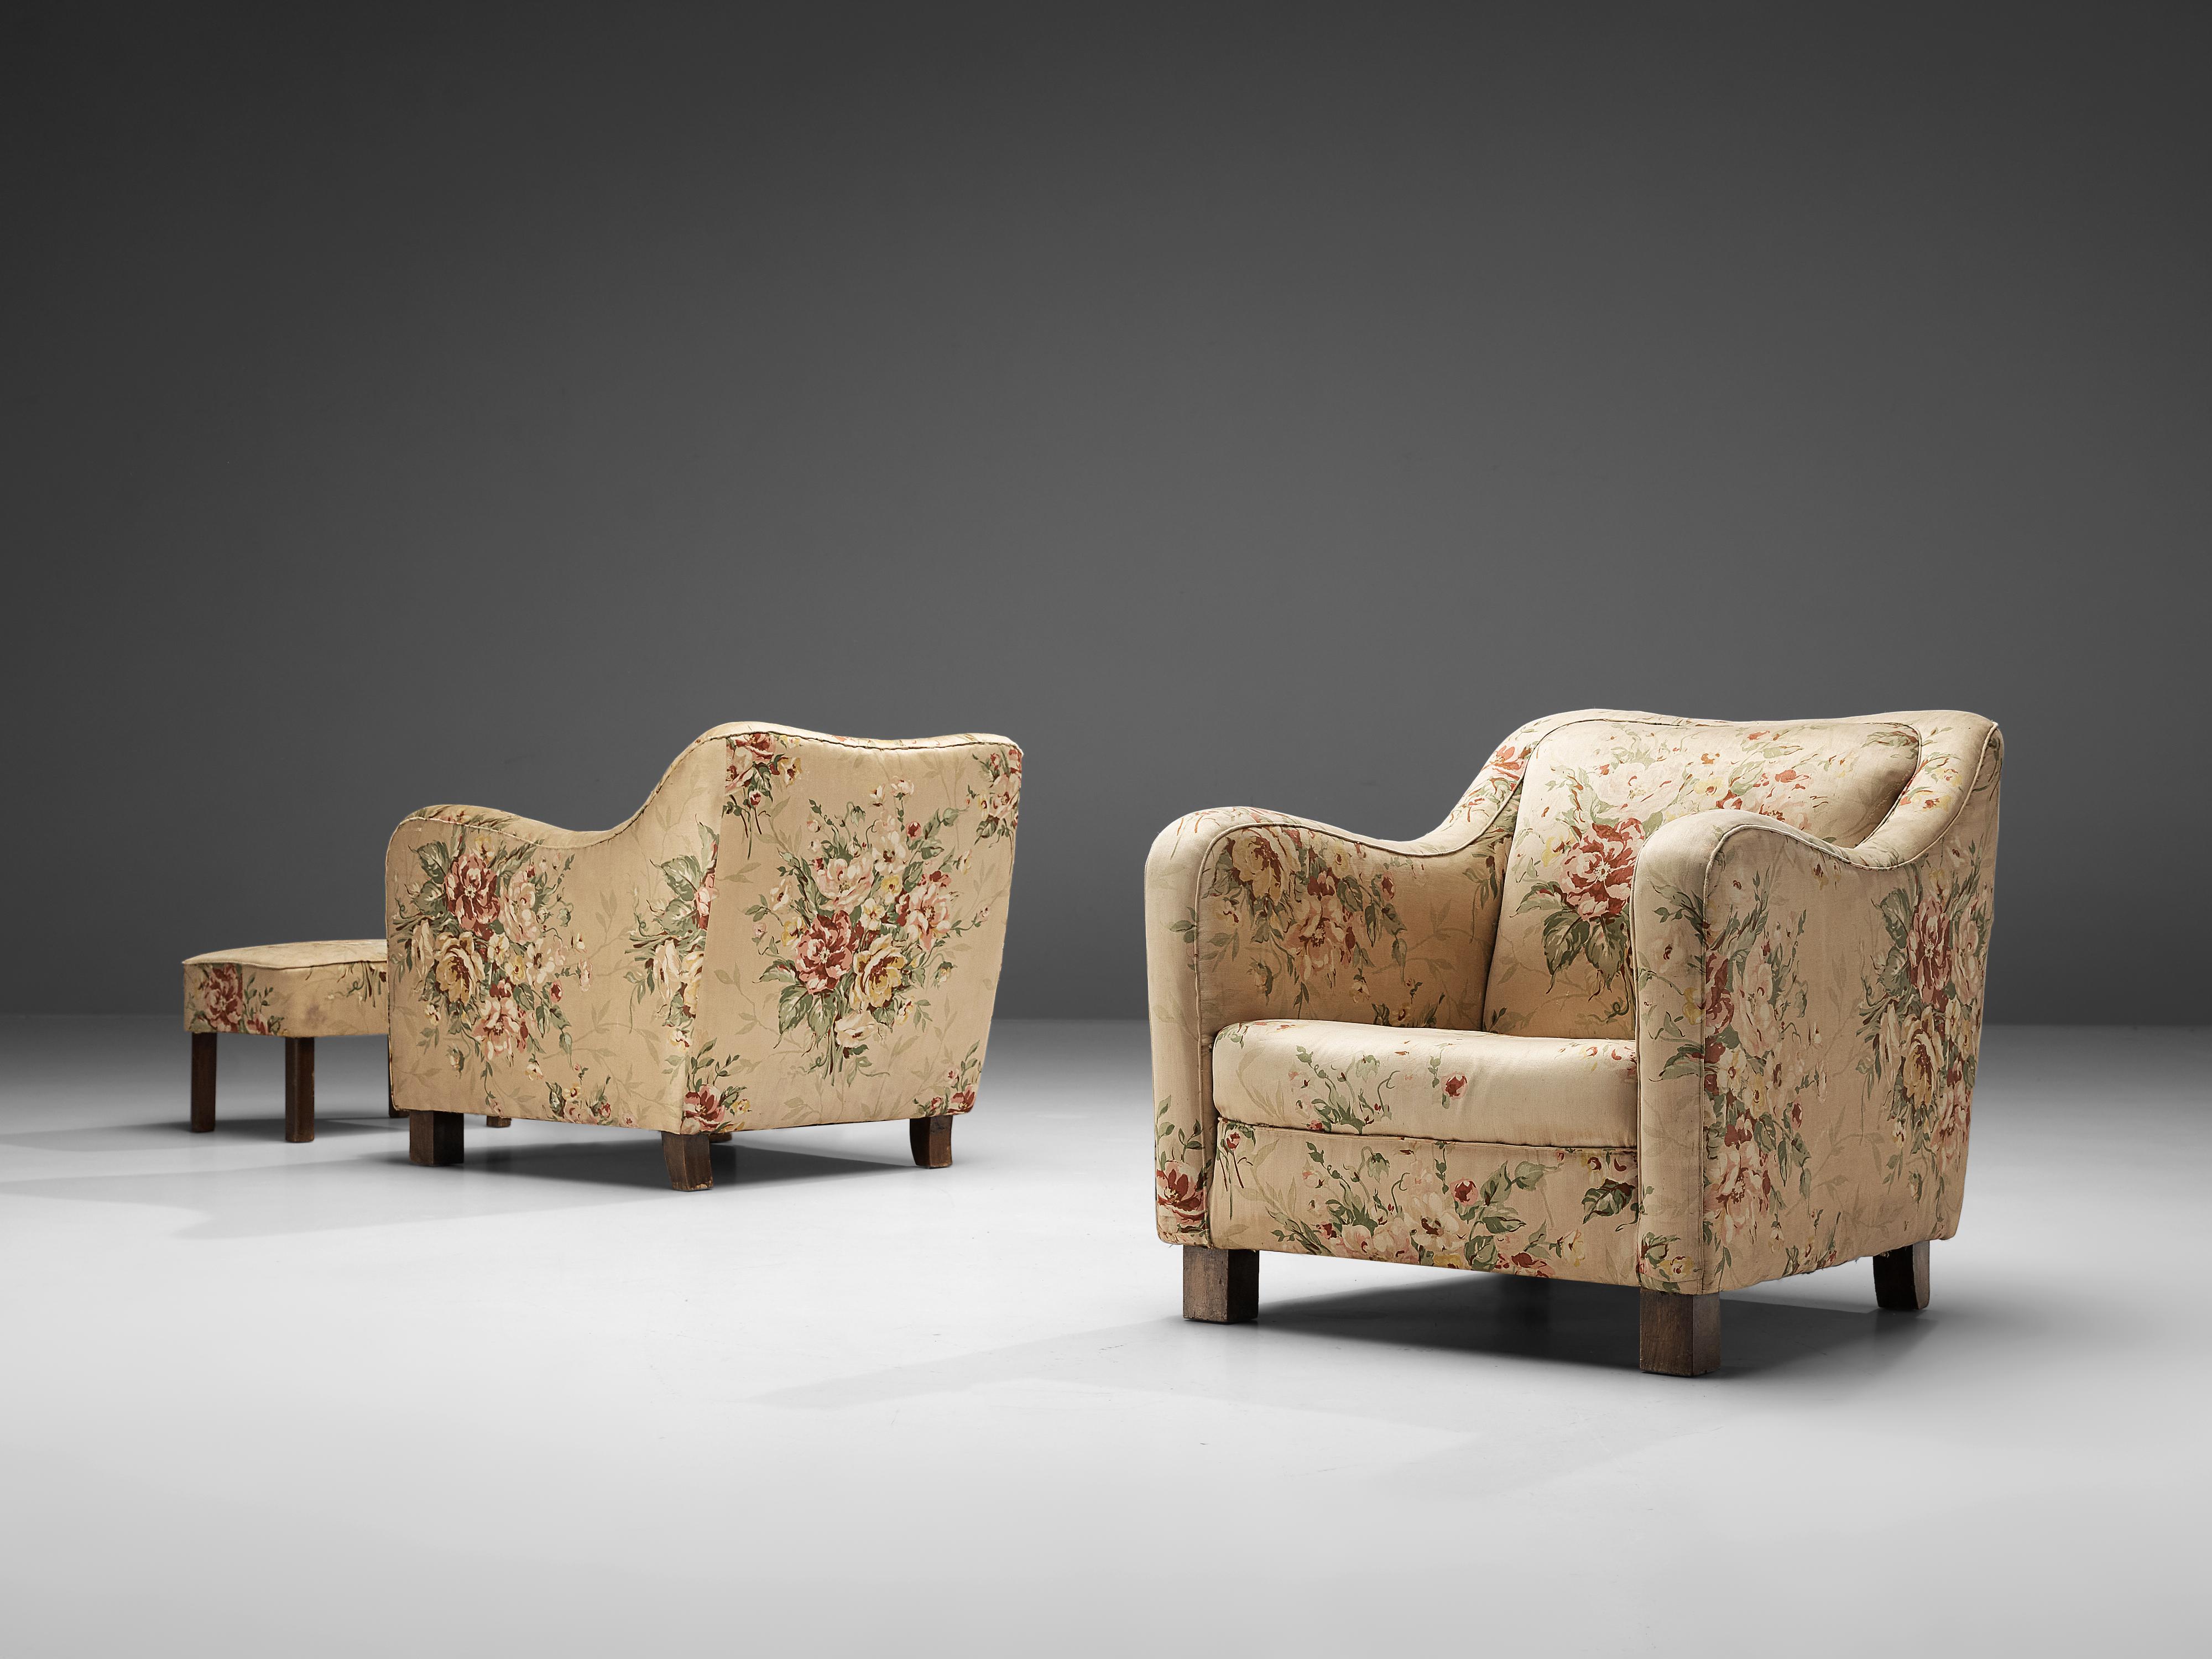 Italian Melchiorre Bega Pair of Lounge Chairs in Floral Upholstery, 1930s